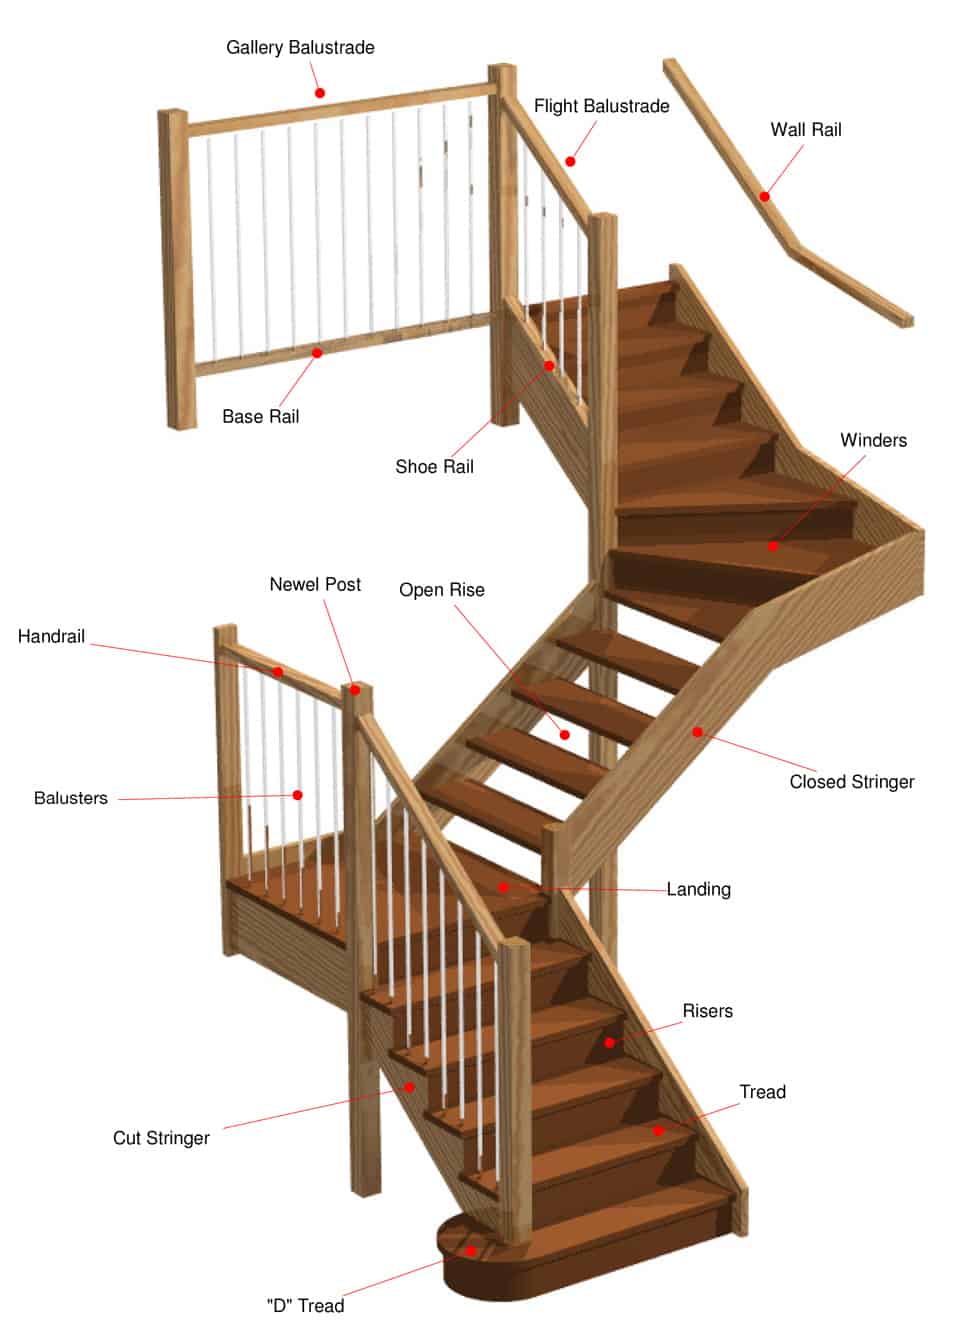 Understanding Parts Of Stairs: Components Of Staircase And Their Details